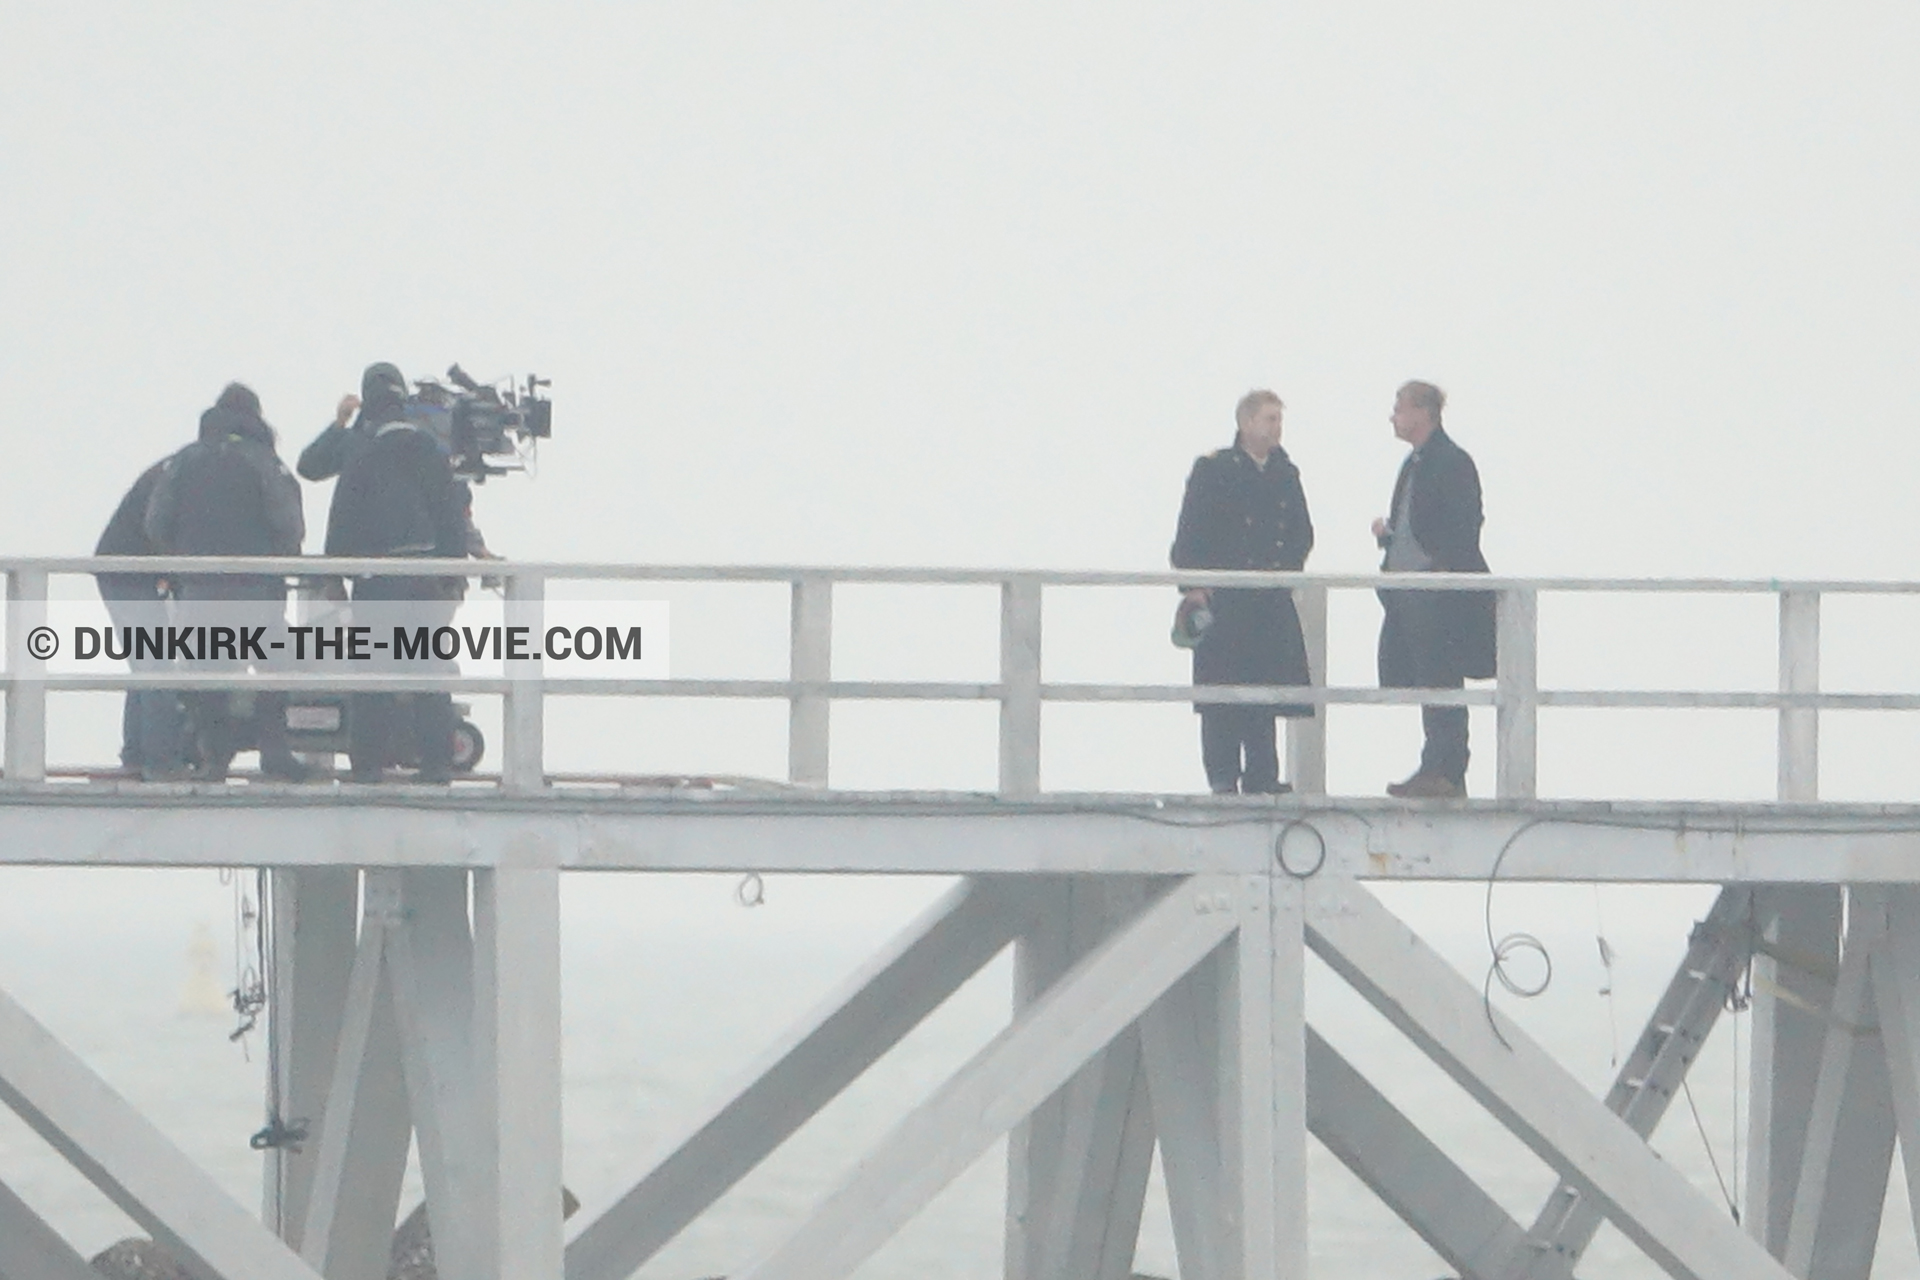 Picture with IMAX camera, EST pier, Kenneth Branagh, Christopher Nolan, technical team,  from behind the scene of the Dunkirk movie by Nolan